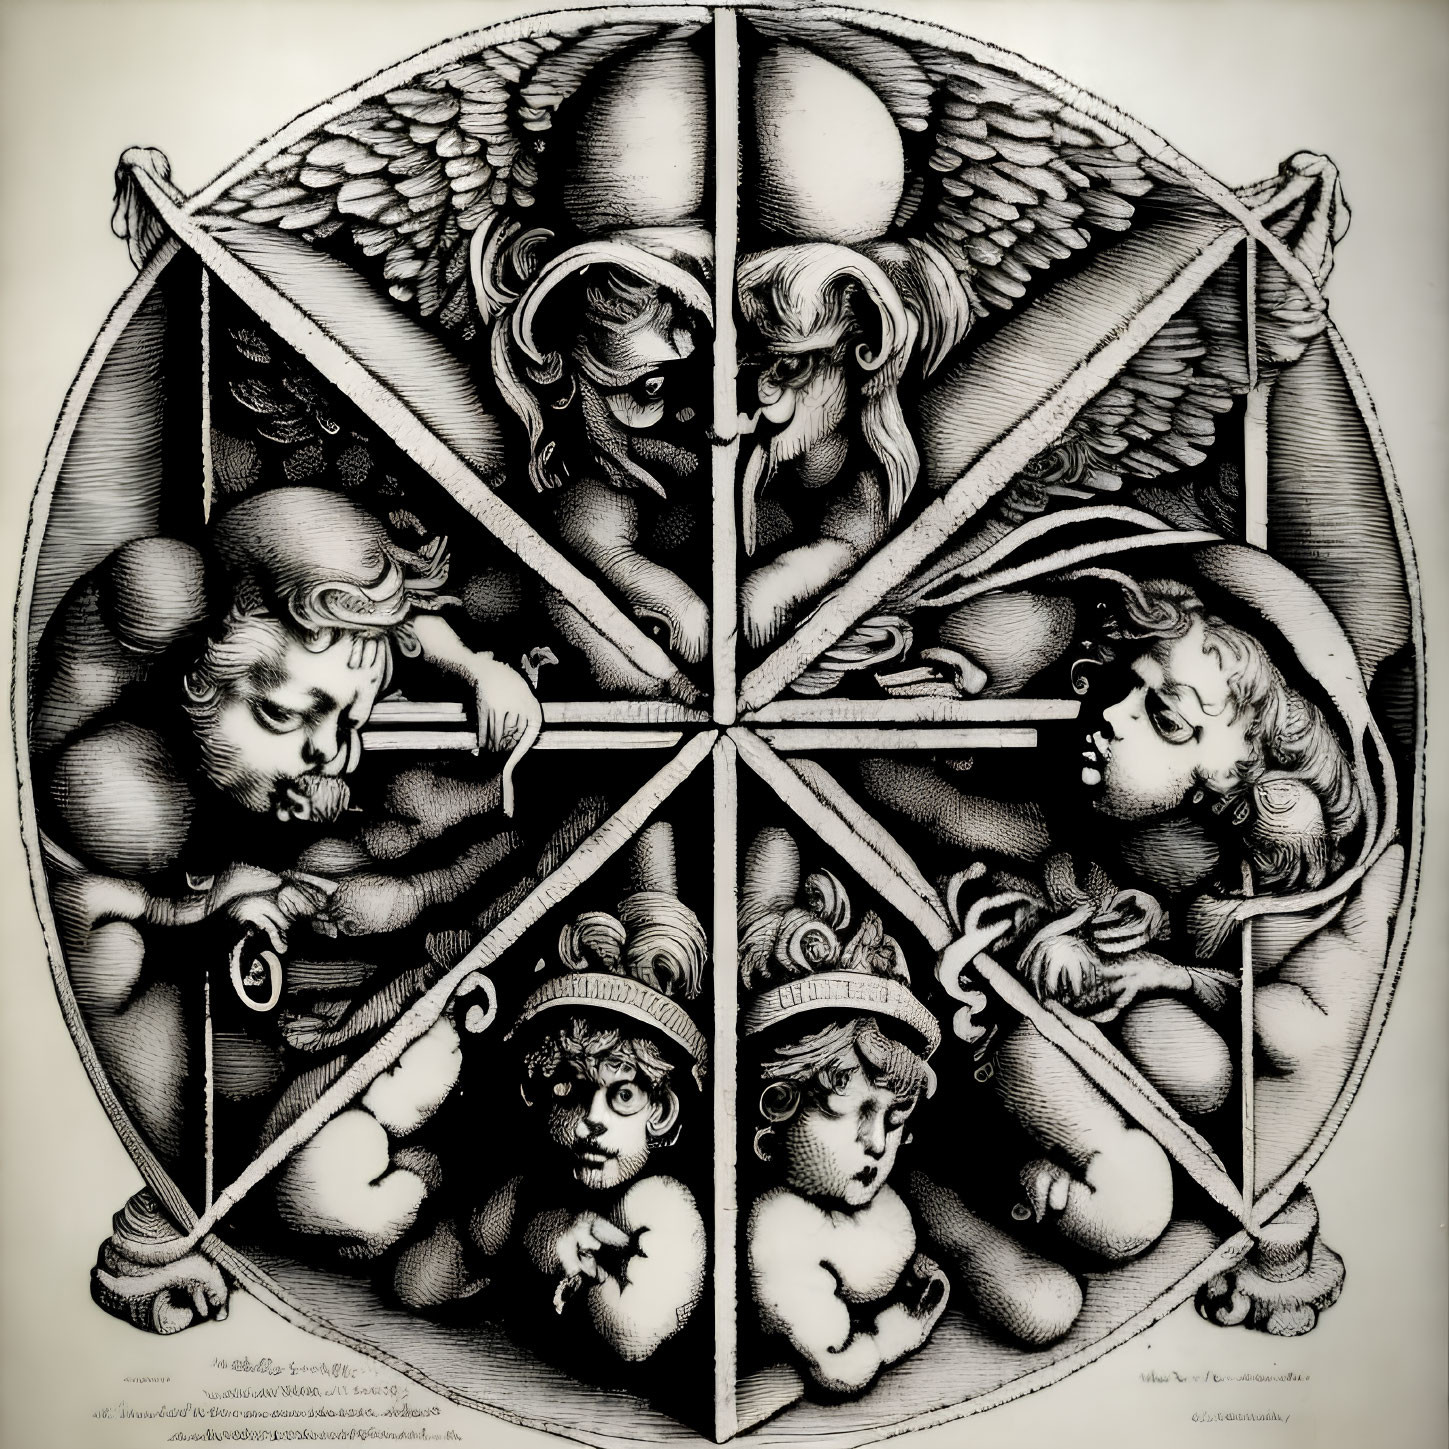 Monochrome illustration of four angels playing instruments